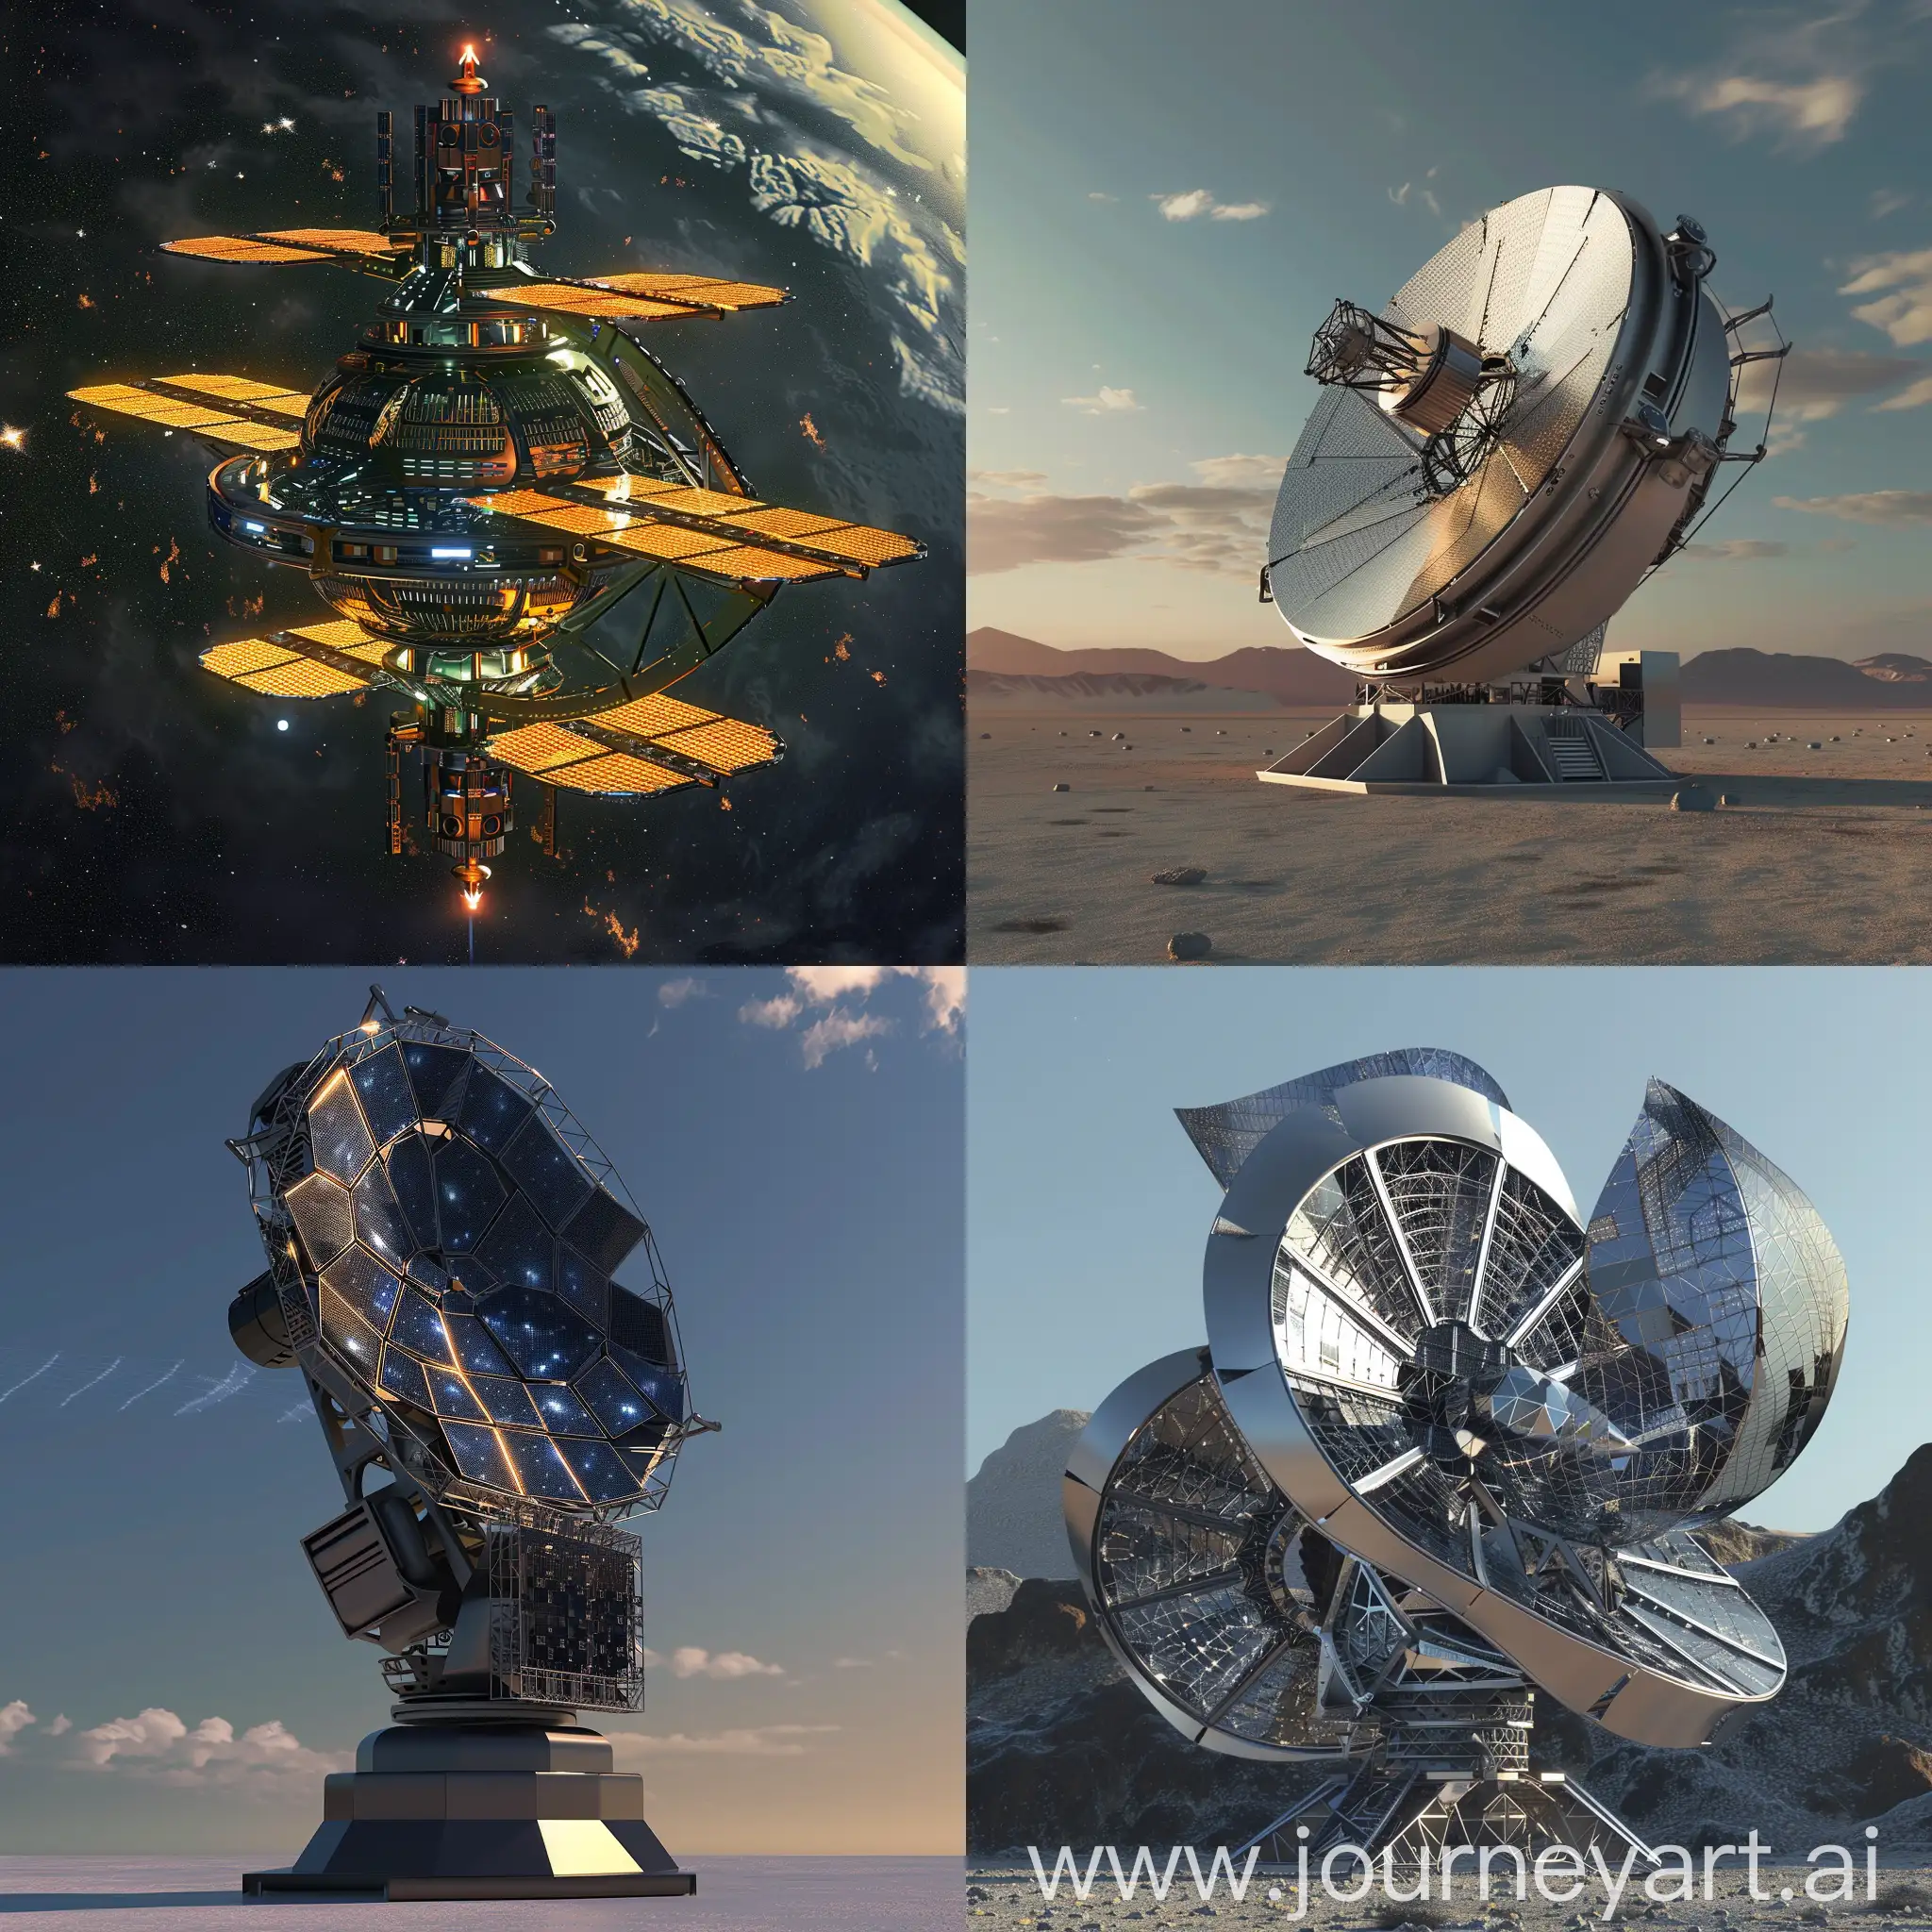 Sci-fi futuristic space telescope, Extremely Large Mirrors or Lens Arrays, Active Optics, Extreme Cooling, Starshades, Formation Flying Observatories, Space-Based Interferometers, Hyperspectral Imaging, Biosignatures Detection, Ultraviolet and X-ray Vision, Deployable Telescopes, Self-Reconfigurable Mirrors, Bio-inspired Light Trapping, Swarmbased Sensor Arrays, Adaptive Radiation Shielding, Self-Healing Electronics, Onboard AI for Real-Time Calibration, Predictive Maintenance, Autonomous Target Acquisition and Tracking, Intelligent Data Compression and Analysis, Evolvable Internal Systems, Smart Sunshield Deployment, Modular Radiator Panels, Adaptive Thrusters for Precision Pointing, Self-Healing Micrometeoroid Shields, Laser Communication Network, Deployable Light Sails, Energy Harvesting Skin, Autonomous Docking and Assembly, Robotic External Maintenance Arms, Dynamic Environmental Sensors, Morphing Aperture, Bio-inspired Radiator Fins, Swarmbased Micrometeoroid Defense, Self-Calibrating Solar Sails, Adaptive Laser Communication Array, Environmental Monitoring Skin, Self-Deploying Sensor Pods, Modular Docking Stations, Robotic External Assembly Platforms, Dynamic Power Grid Management, unreal engine 5 rendering, 4K-UHD, 8K-UHD, super-hi vision, soft shadows, soft reflections, soft lighting, soft light, soft details, hard shadows, hard reflections, hard lighting, hard light, hard details --stylize 1000